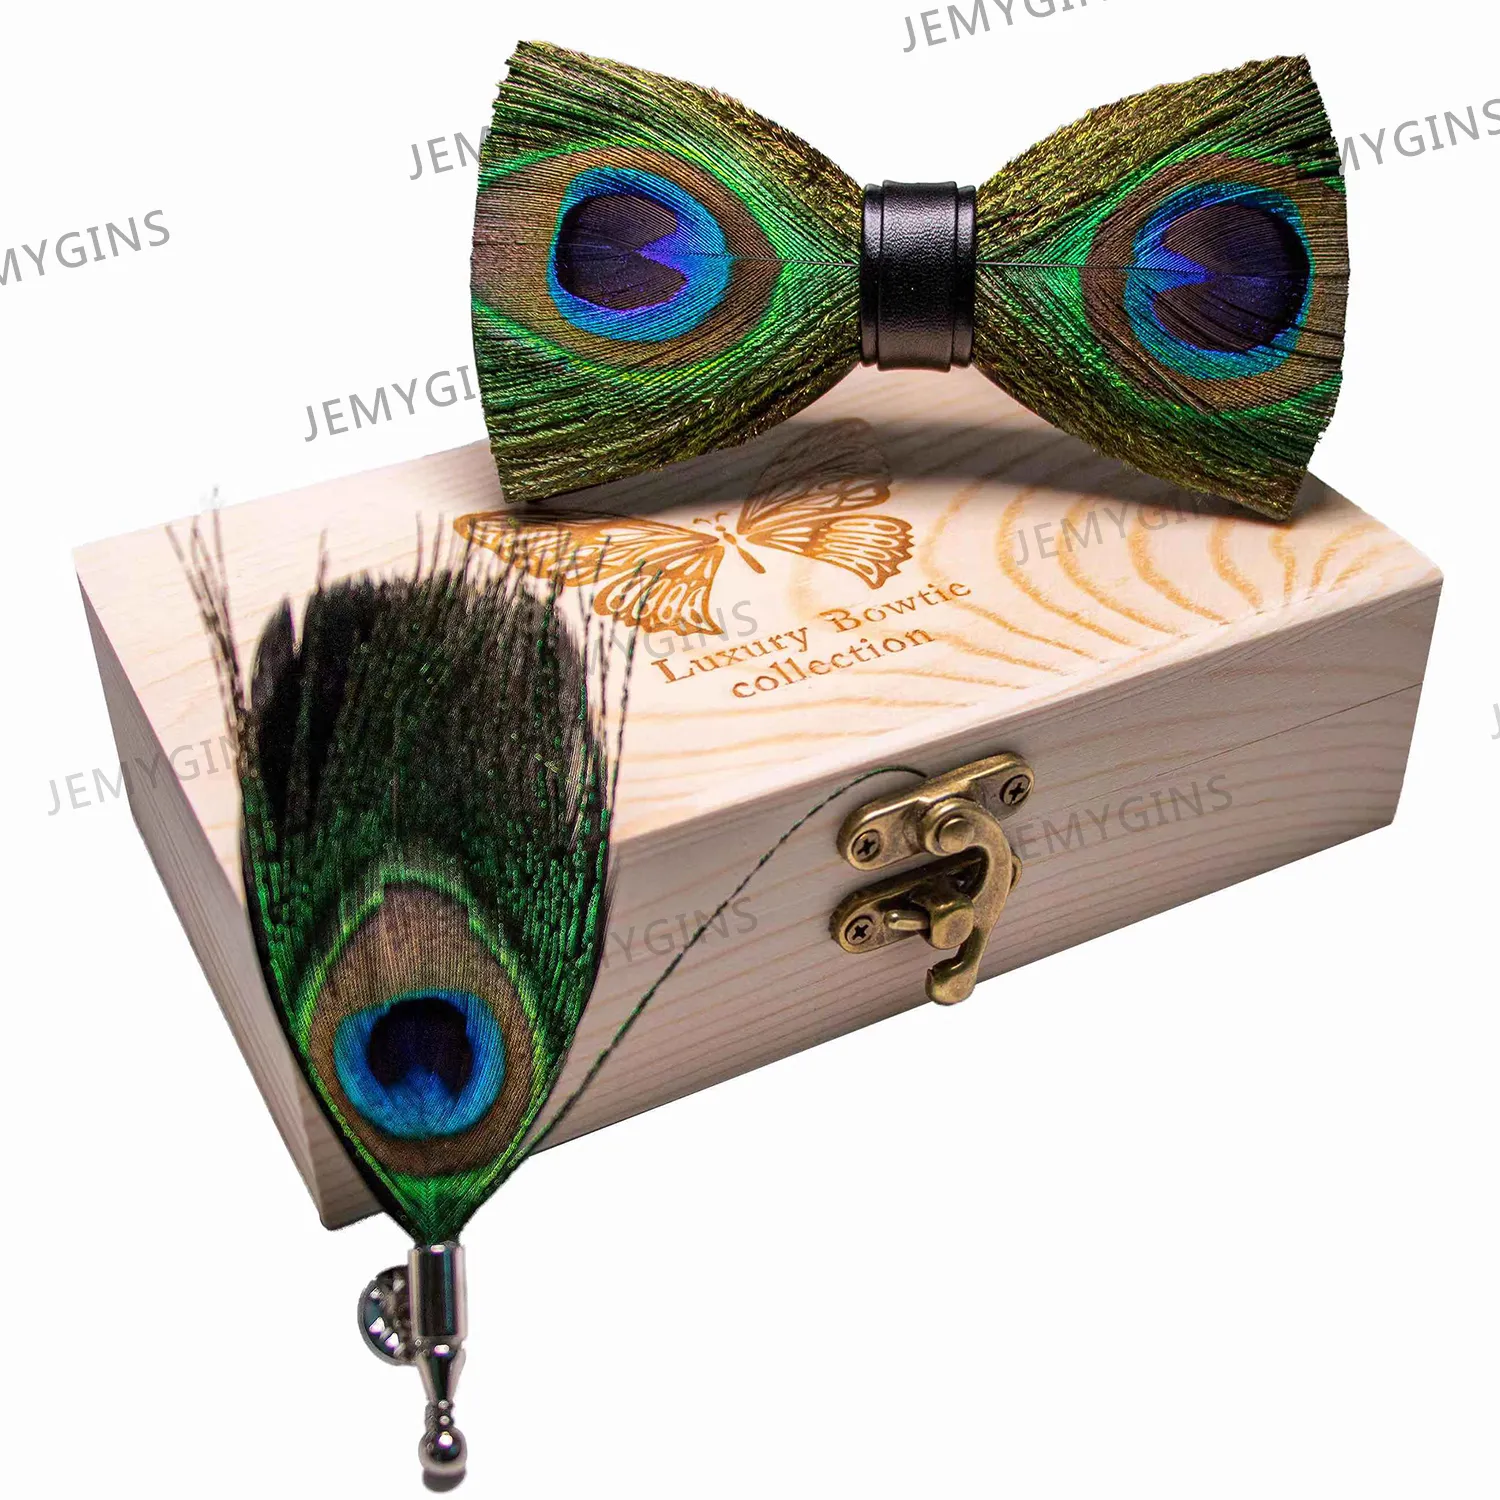 Bow Ties JEMYGINS original bow tie peacock feather handmade leather brooch pine gift set wedding party men's suit Bowtie Necktie 230718